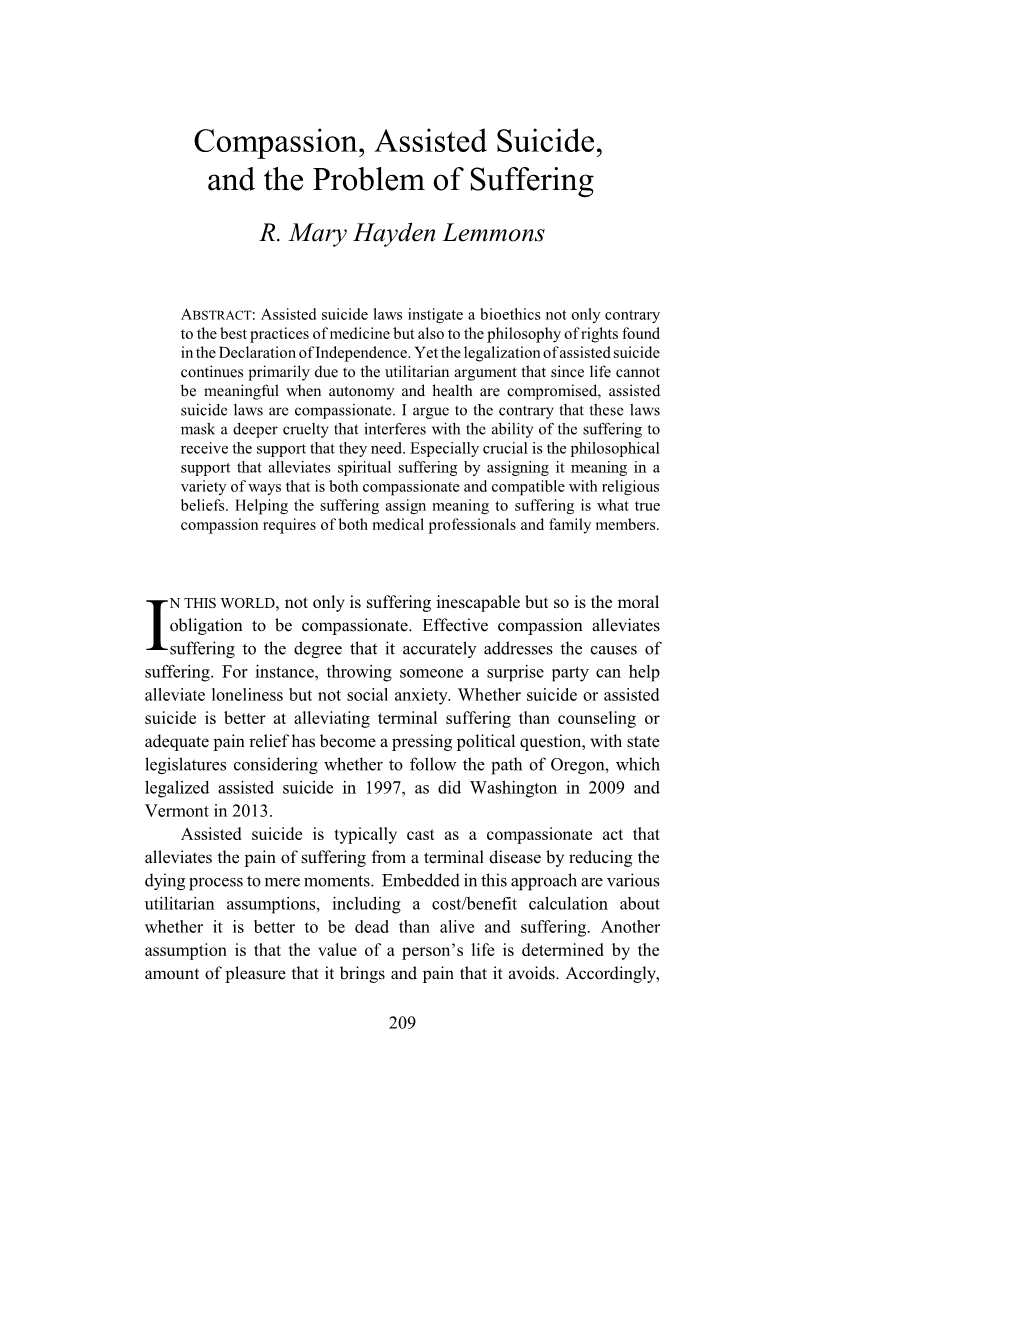 Compassion, Assisted Suicide, and the Problem of Suffering R